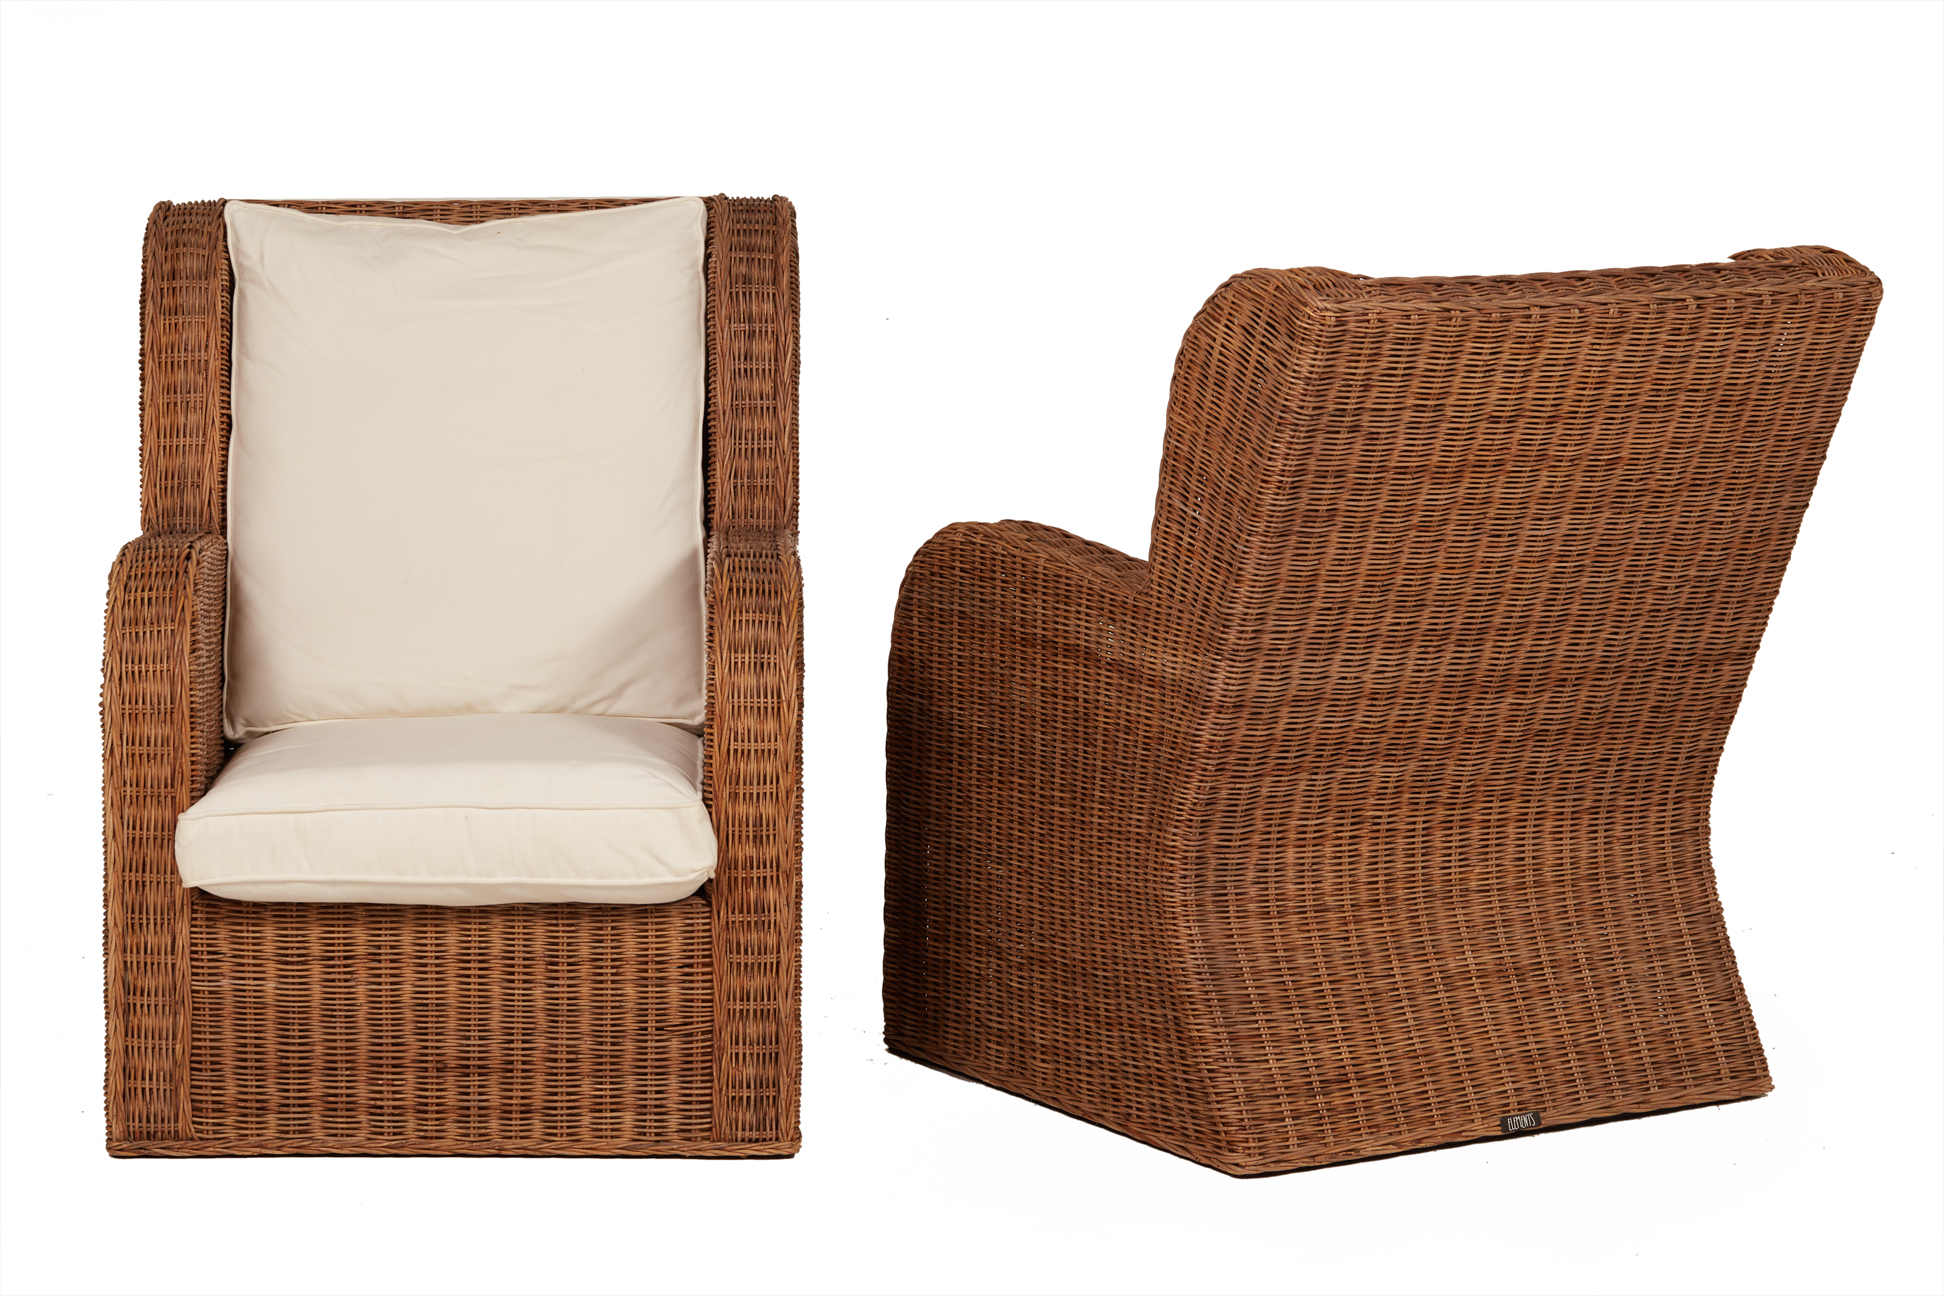 A PAIR OF ELEMENTS WICKER ARMCHAIRS - Image 3 of 3